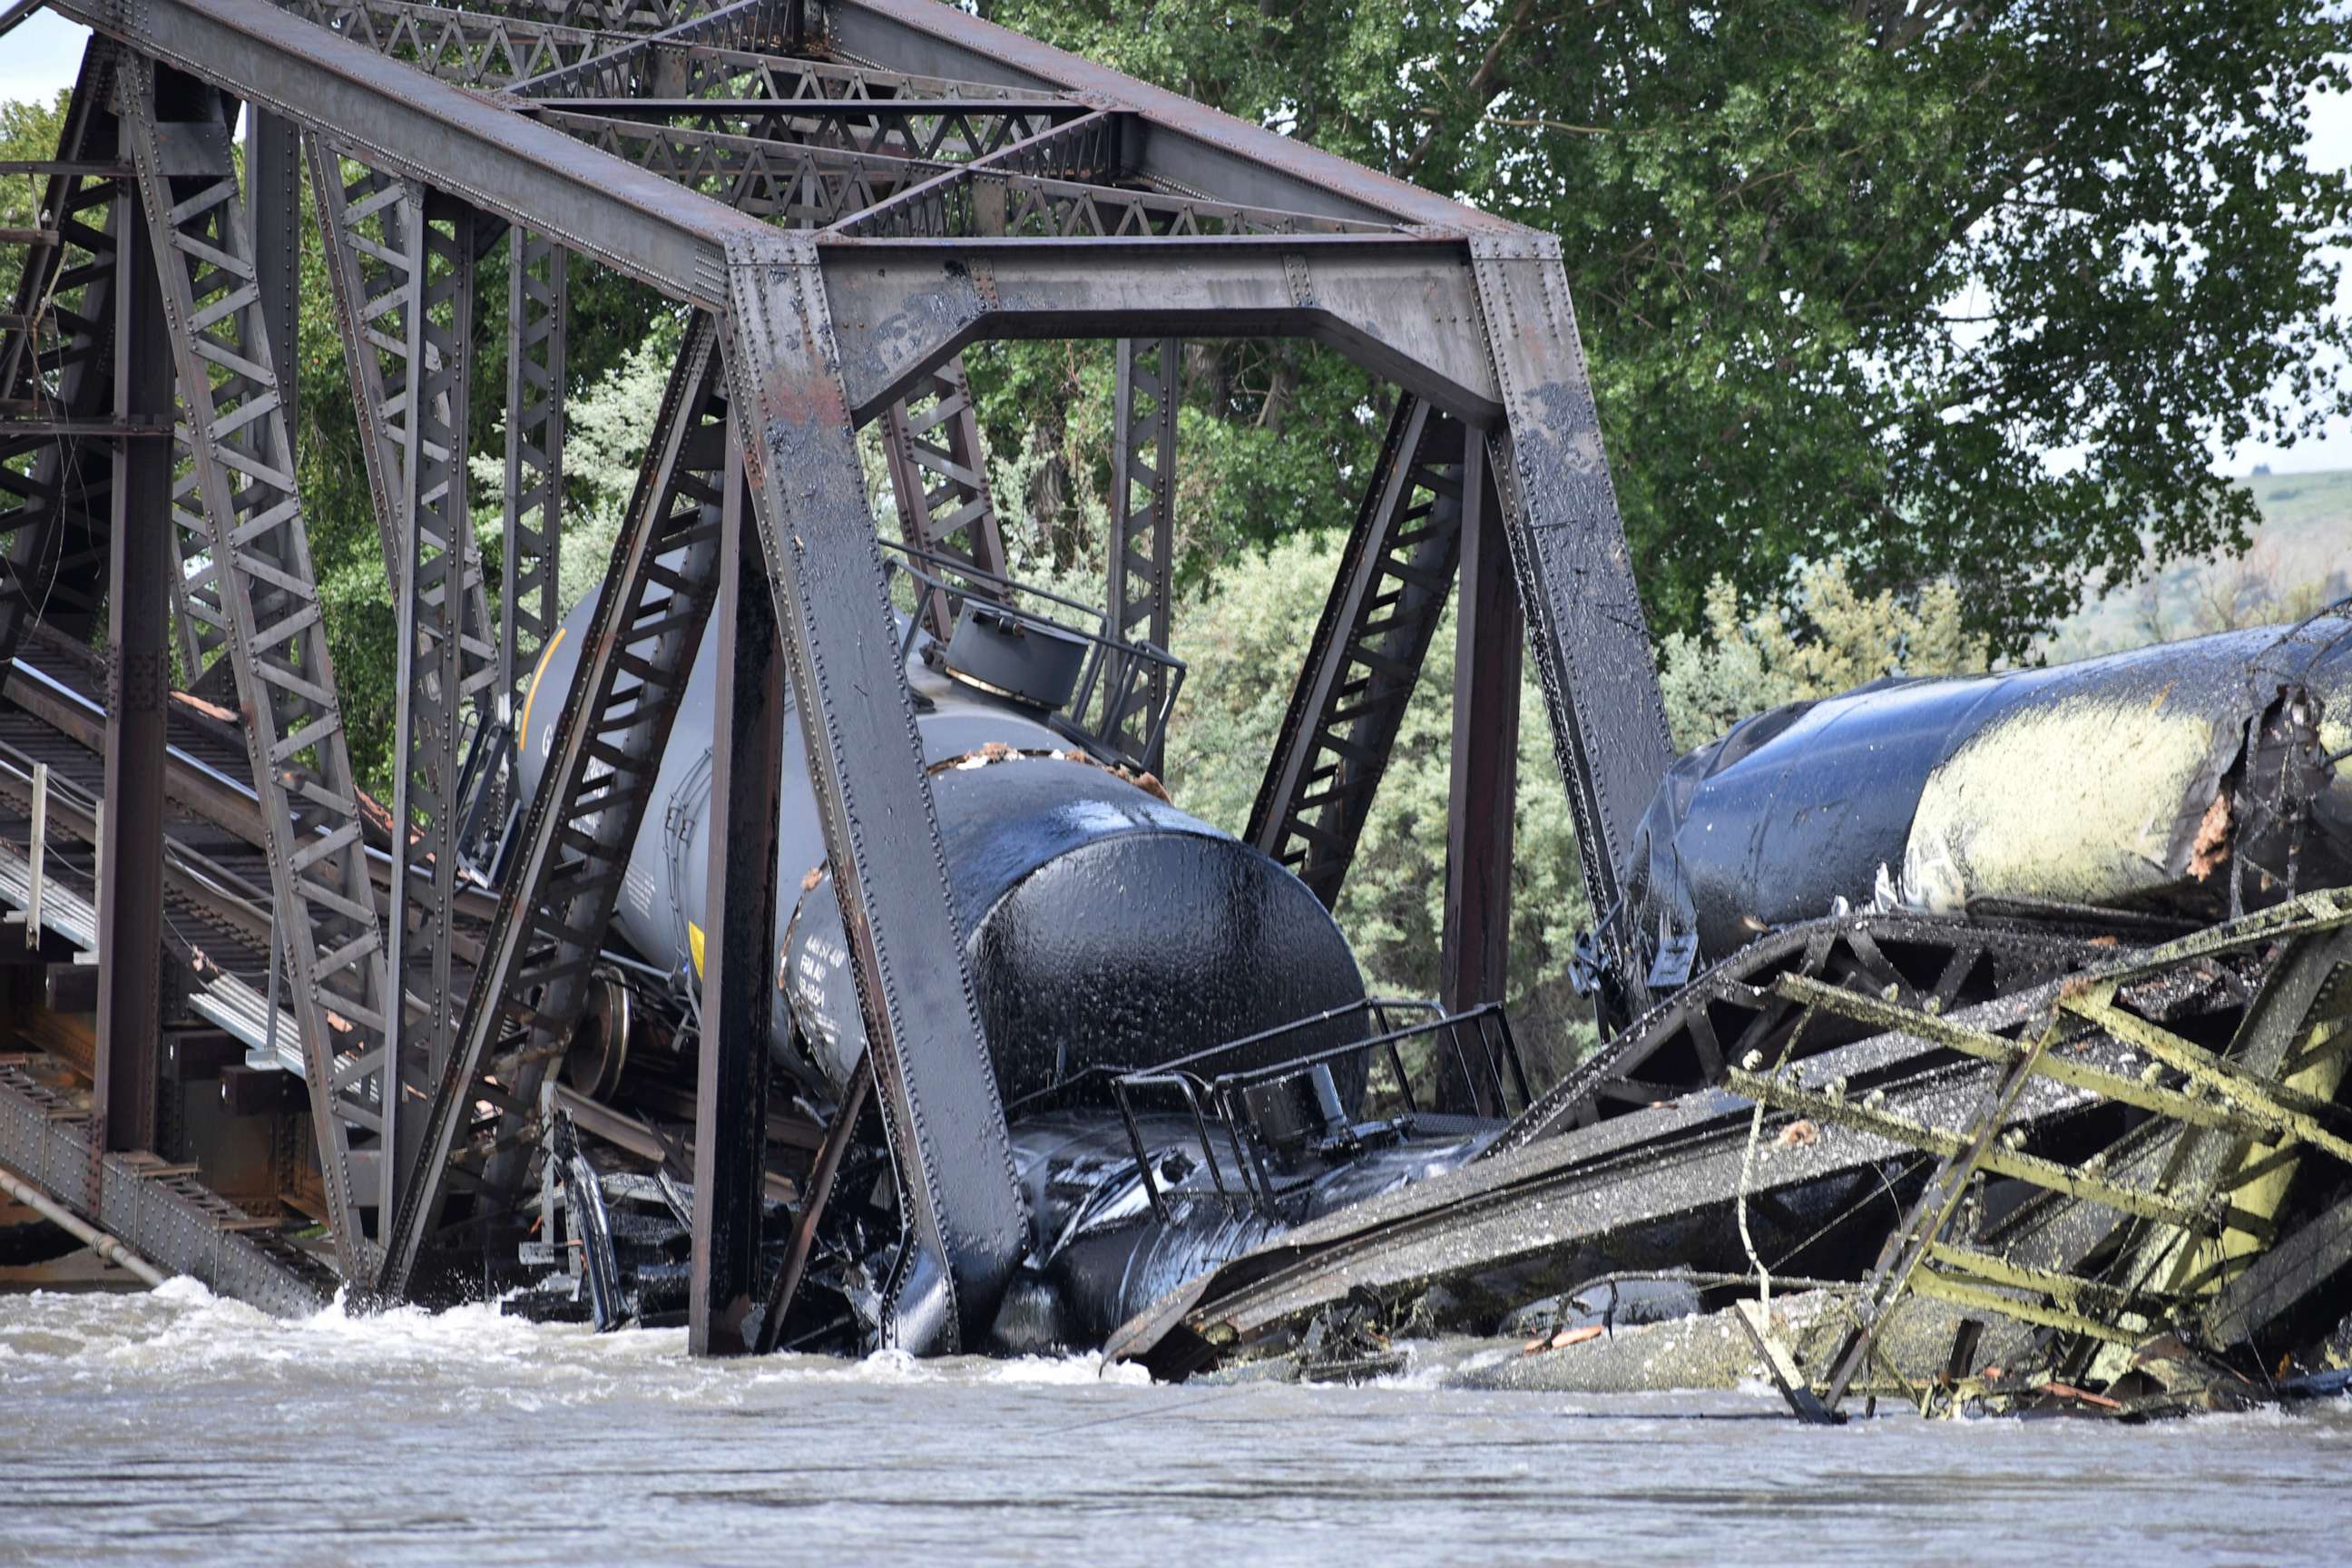 Cleanup continues after train carrying 'potential contaminants' derails